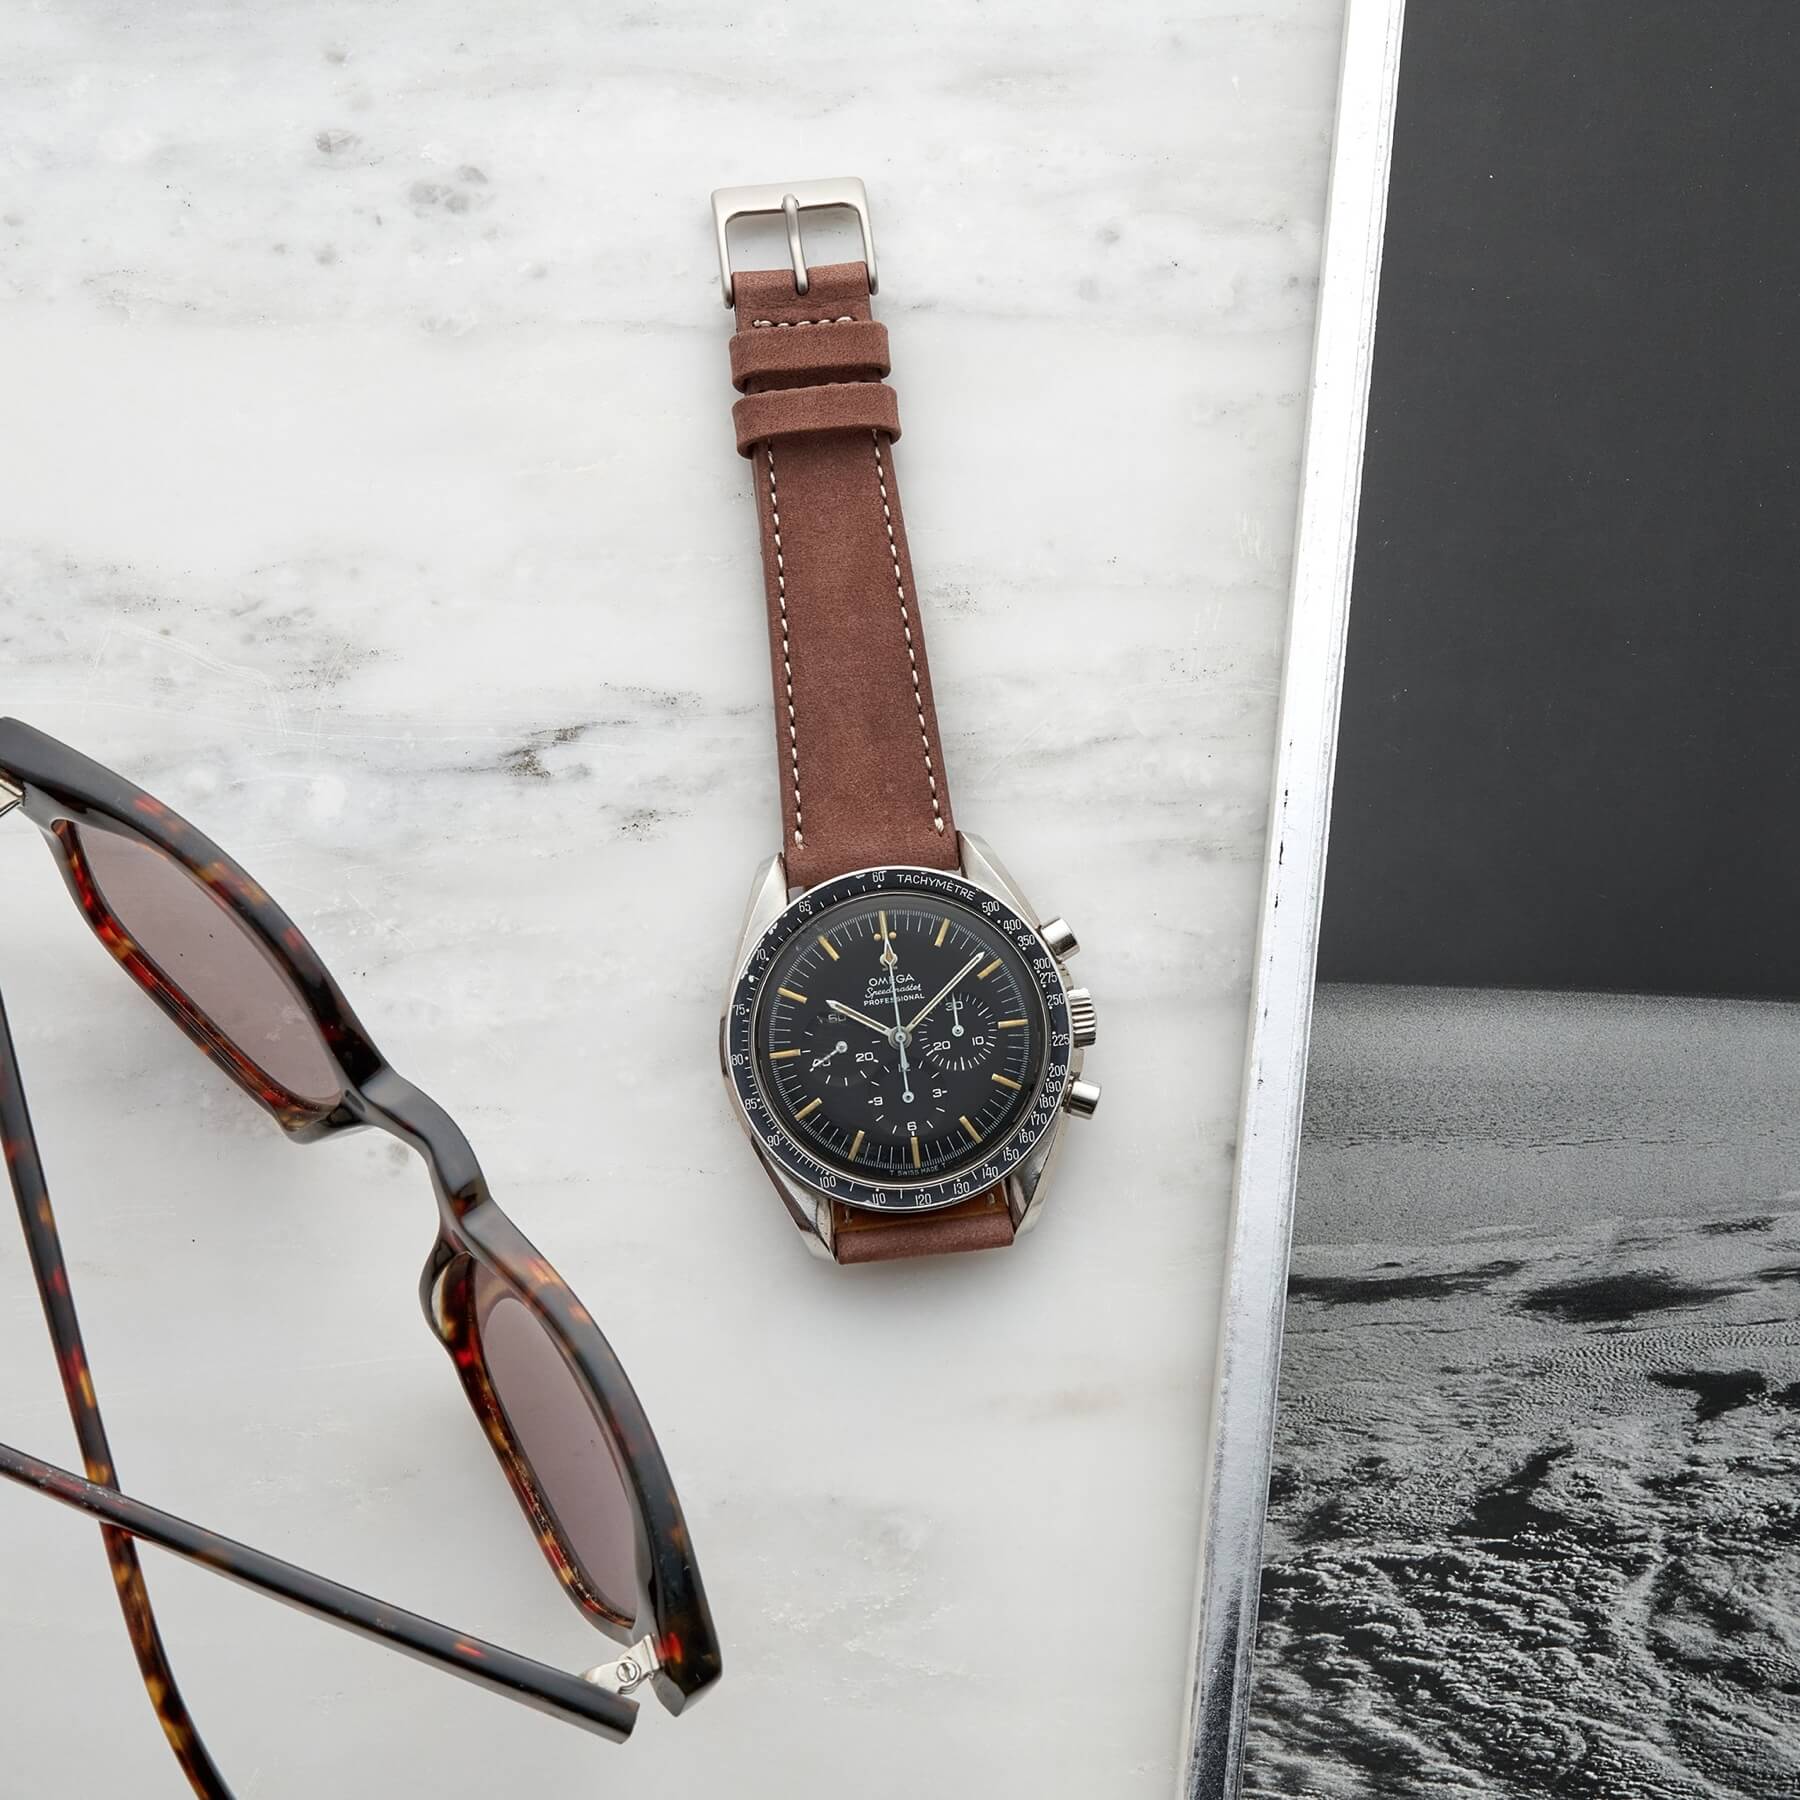 Quality affordable men's timepieces at Hodinkee